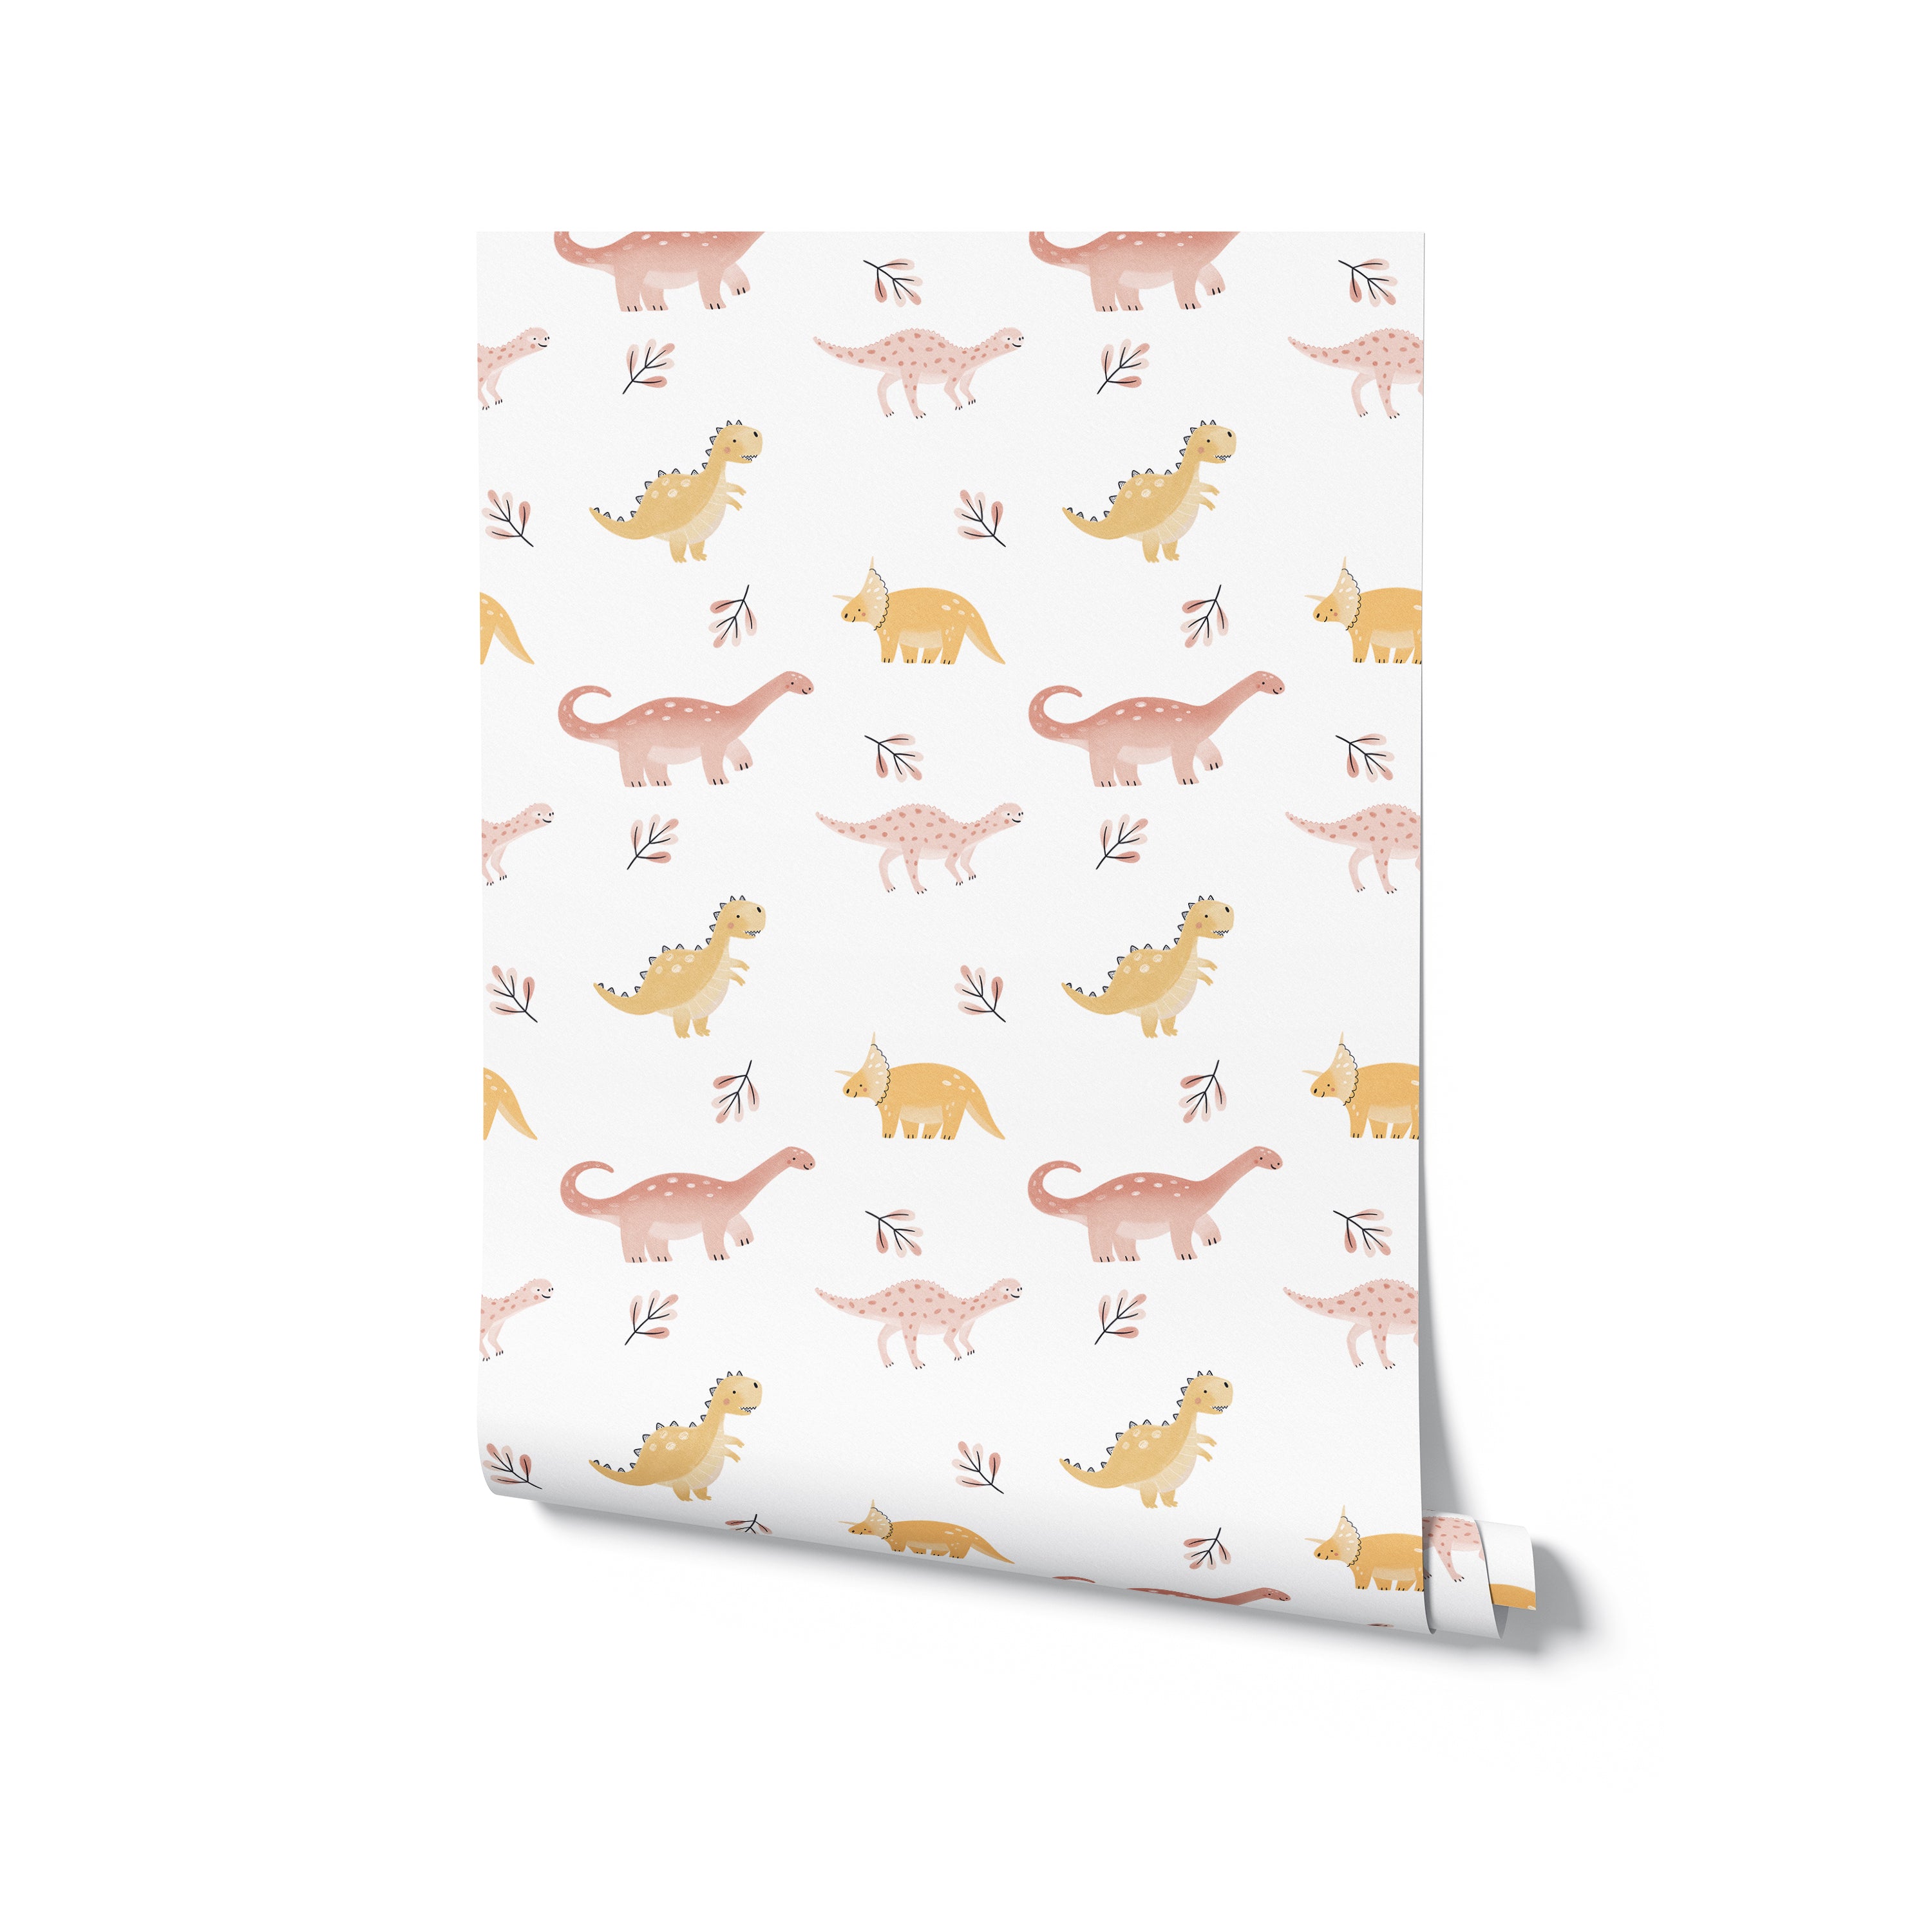 Rolled wallpaper displaying the "Dino Days Wallpaper III" design. This wallpaper features an adorable array of pastel-colored dinosaurs and foliage, designed to add a whimsical and joyful element to any child's bedroom or play area.